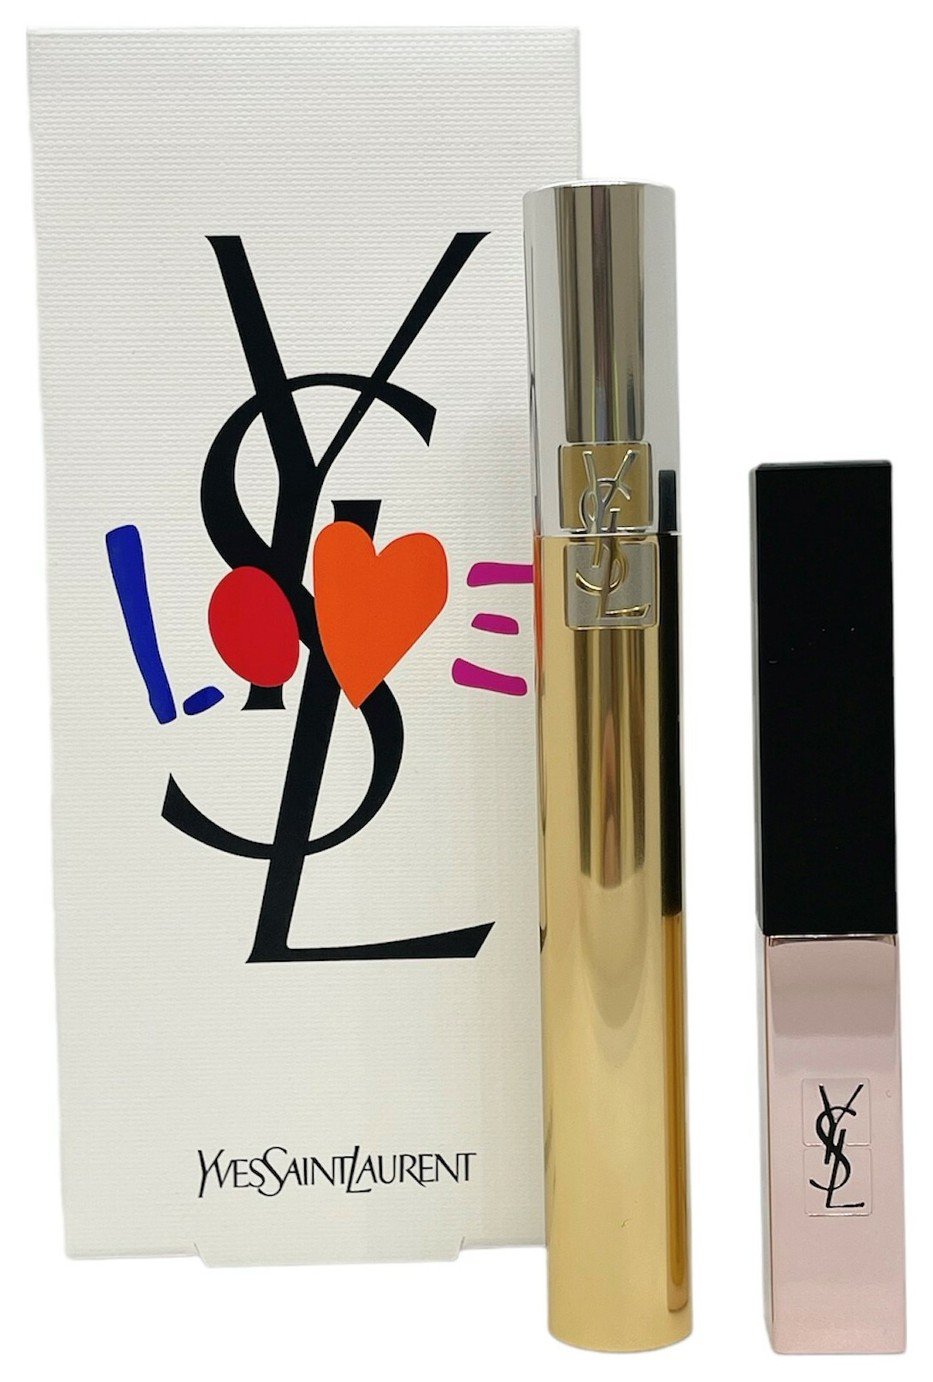 Yves Saint Laurent Volume Effect Mascara and Rouge Couture